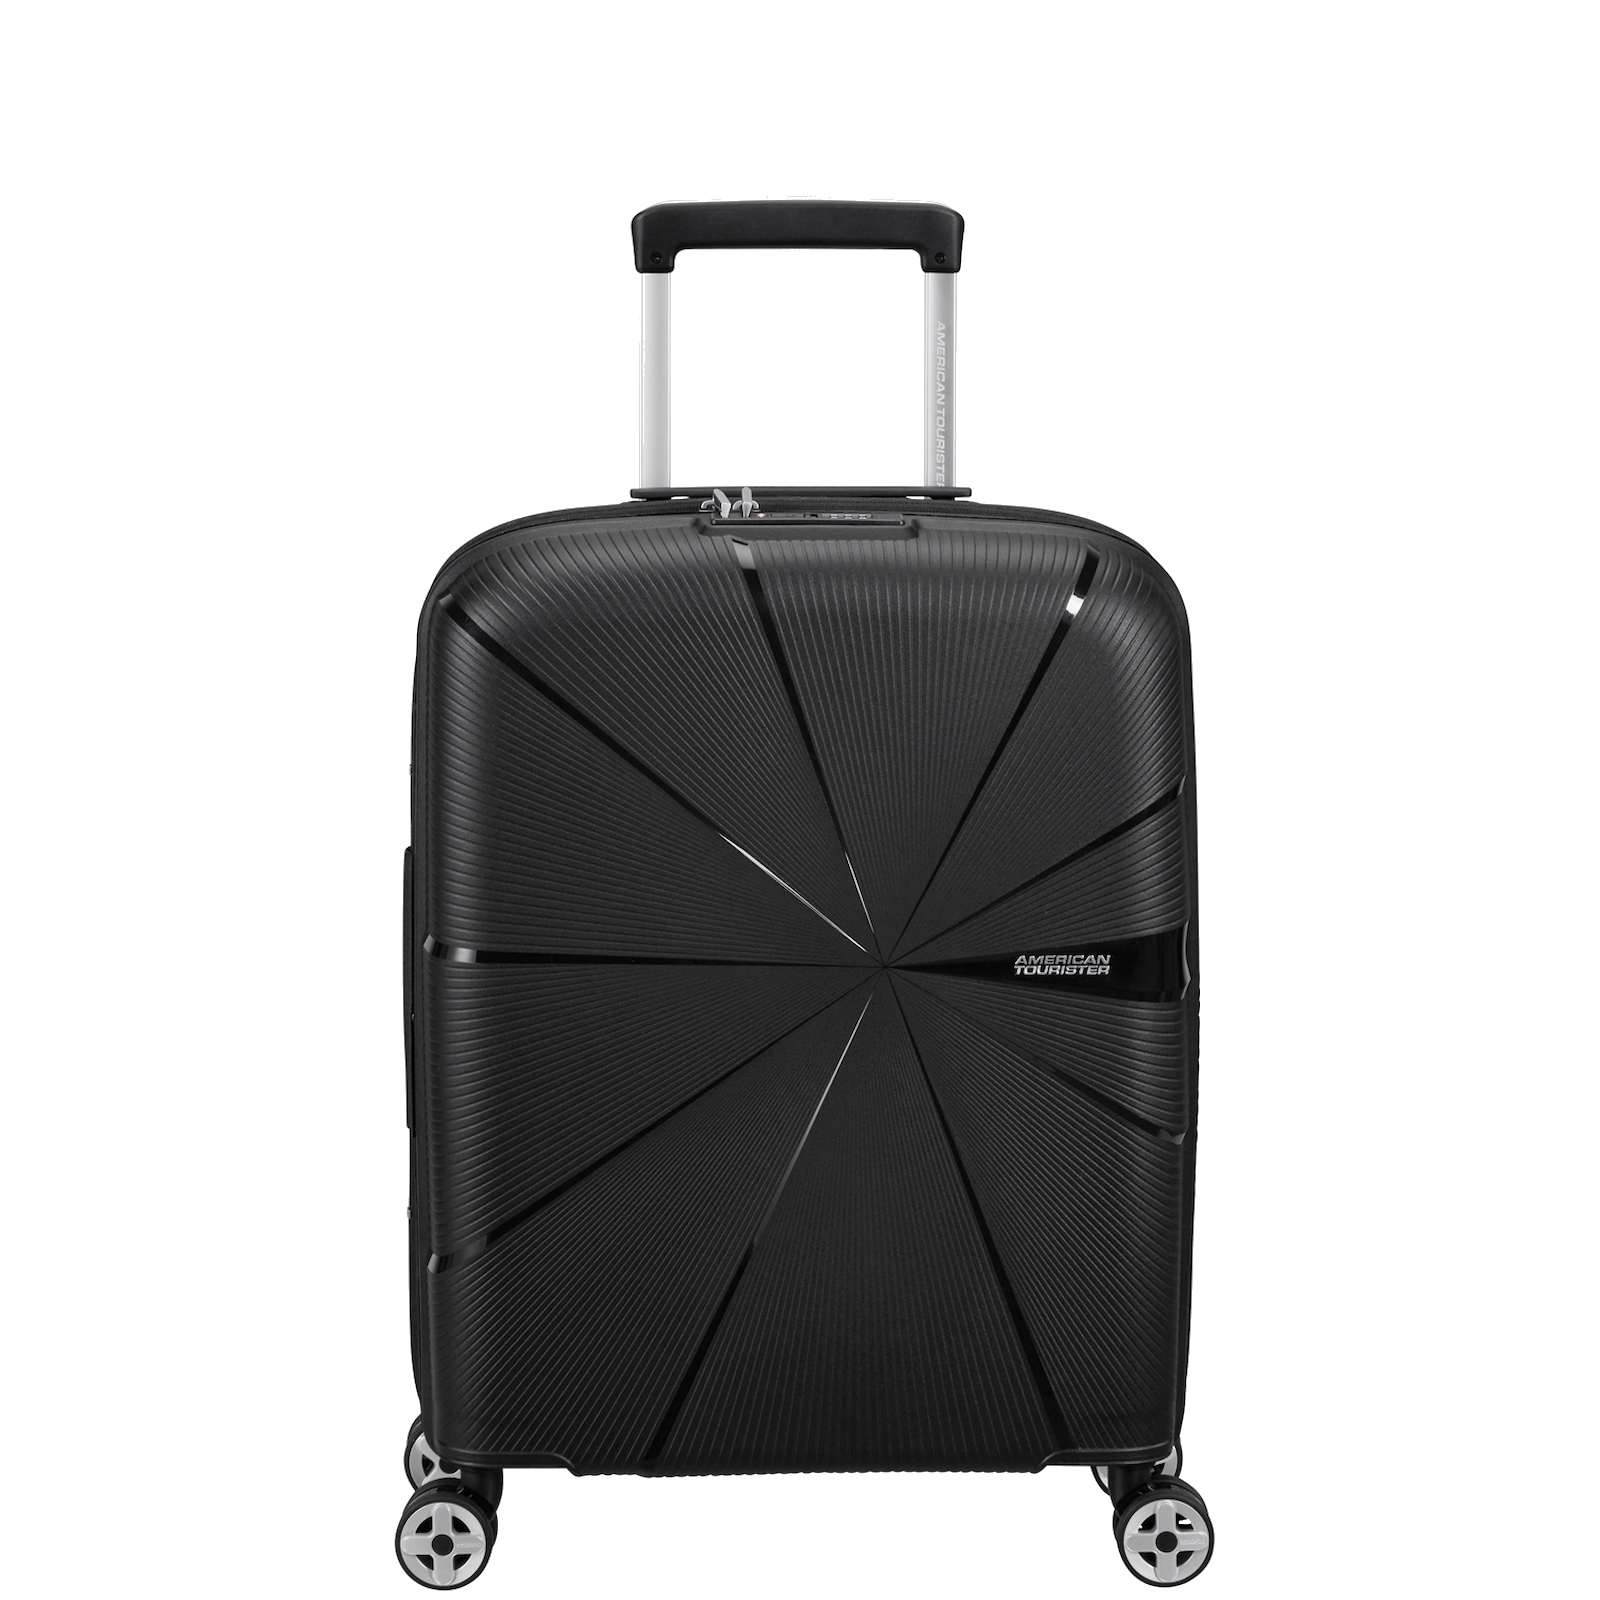 
American Tourister Starvibe 55cm Cabin Suitcase Black